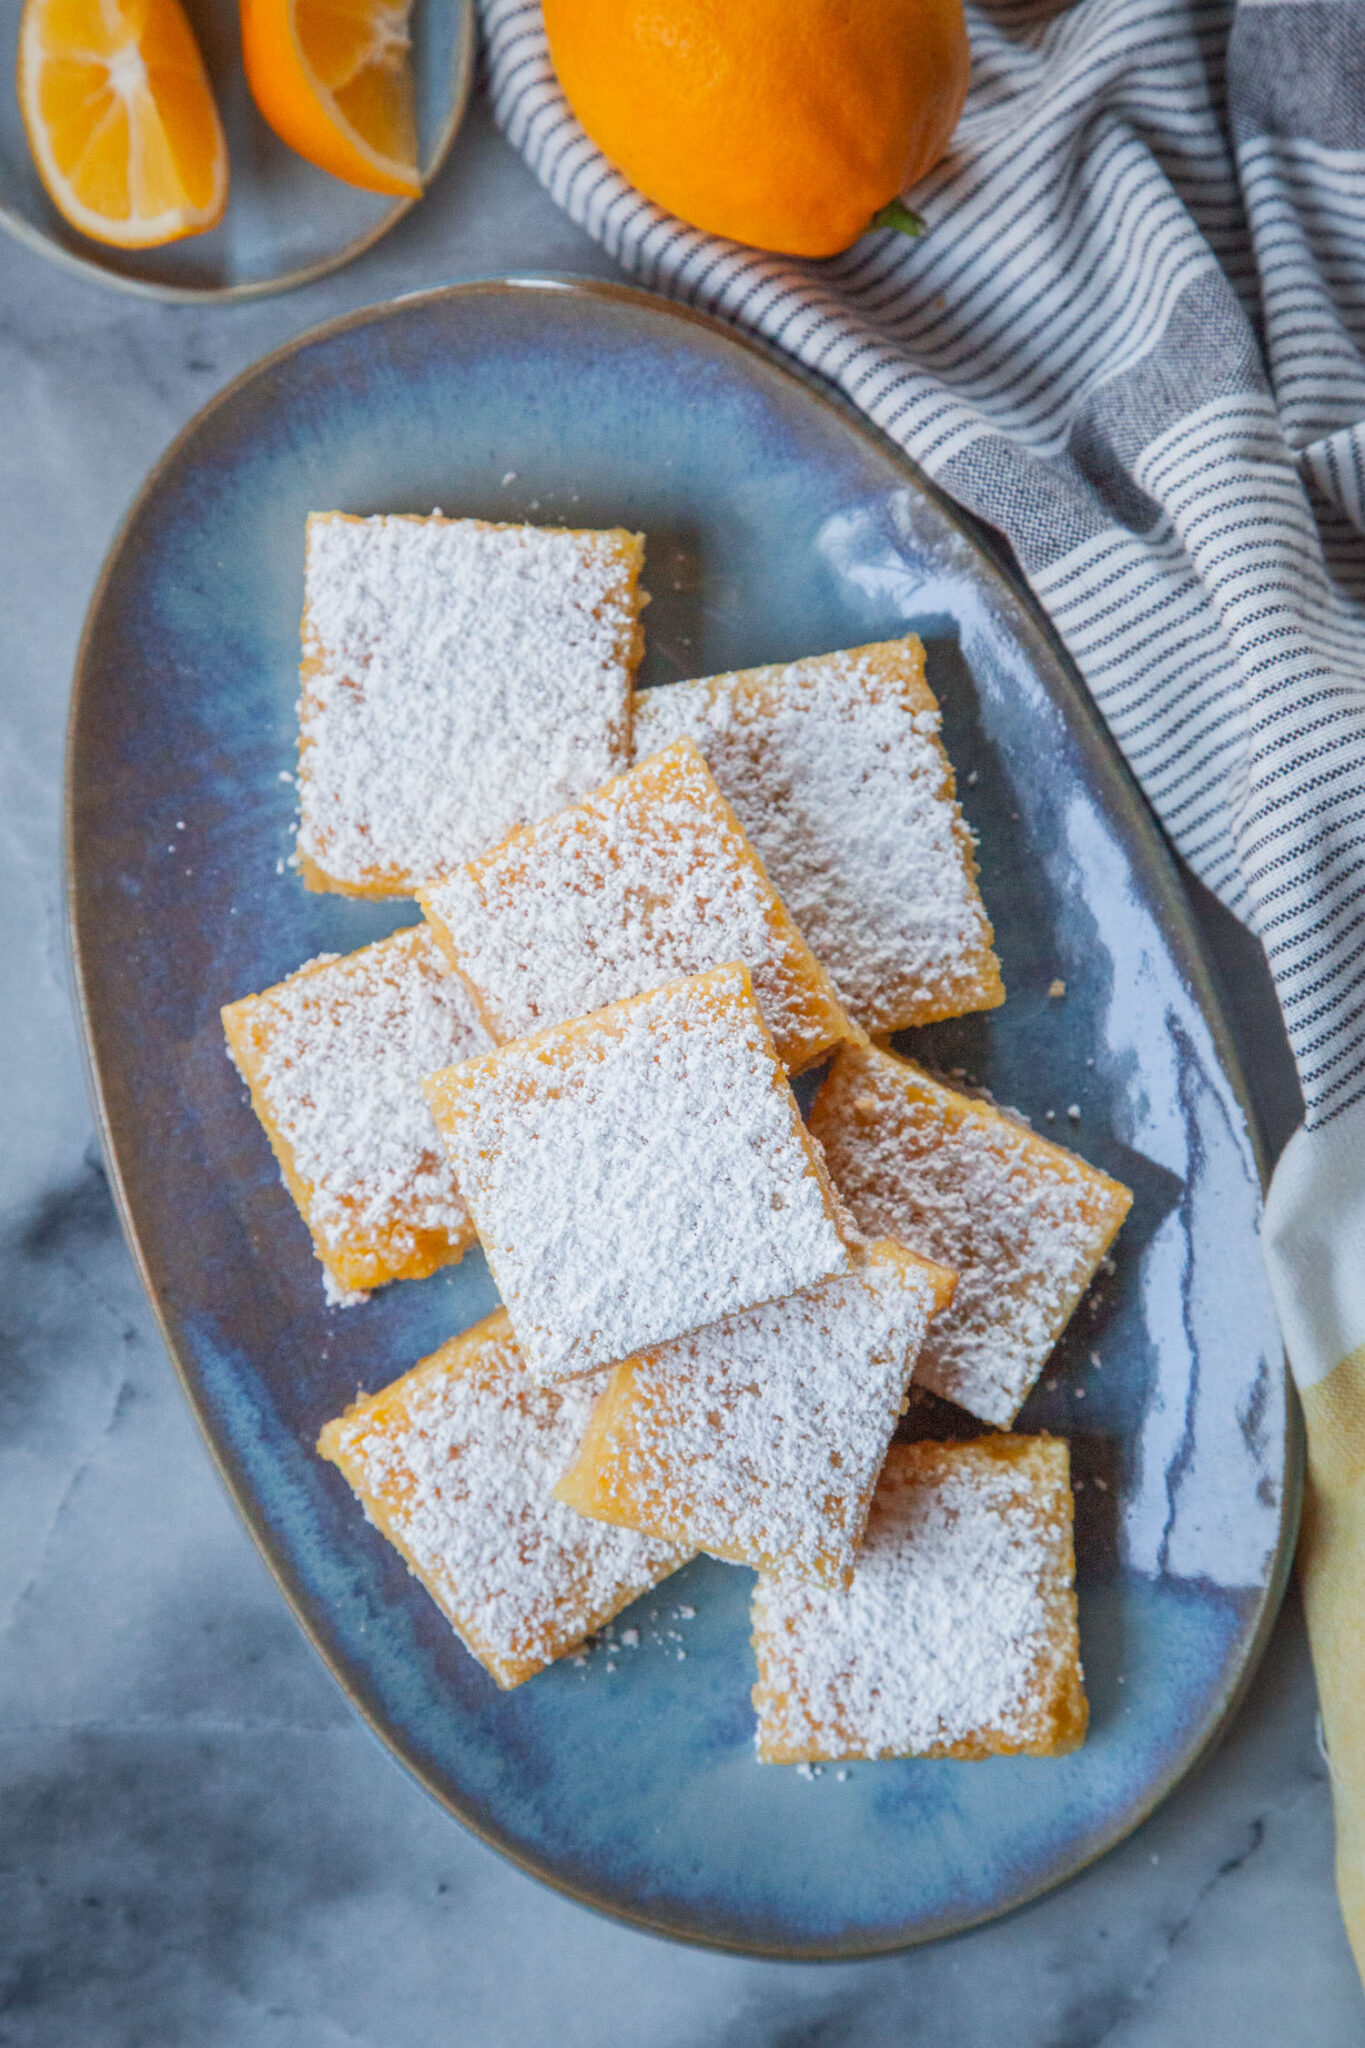 Meyer lemon bars on a blue oval plate, with wedges of Meyer lemon on a small plate next to it, along with a whole Meyer lemon. 